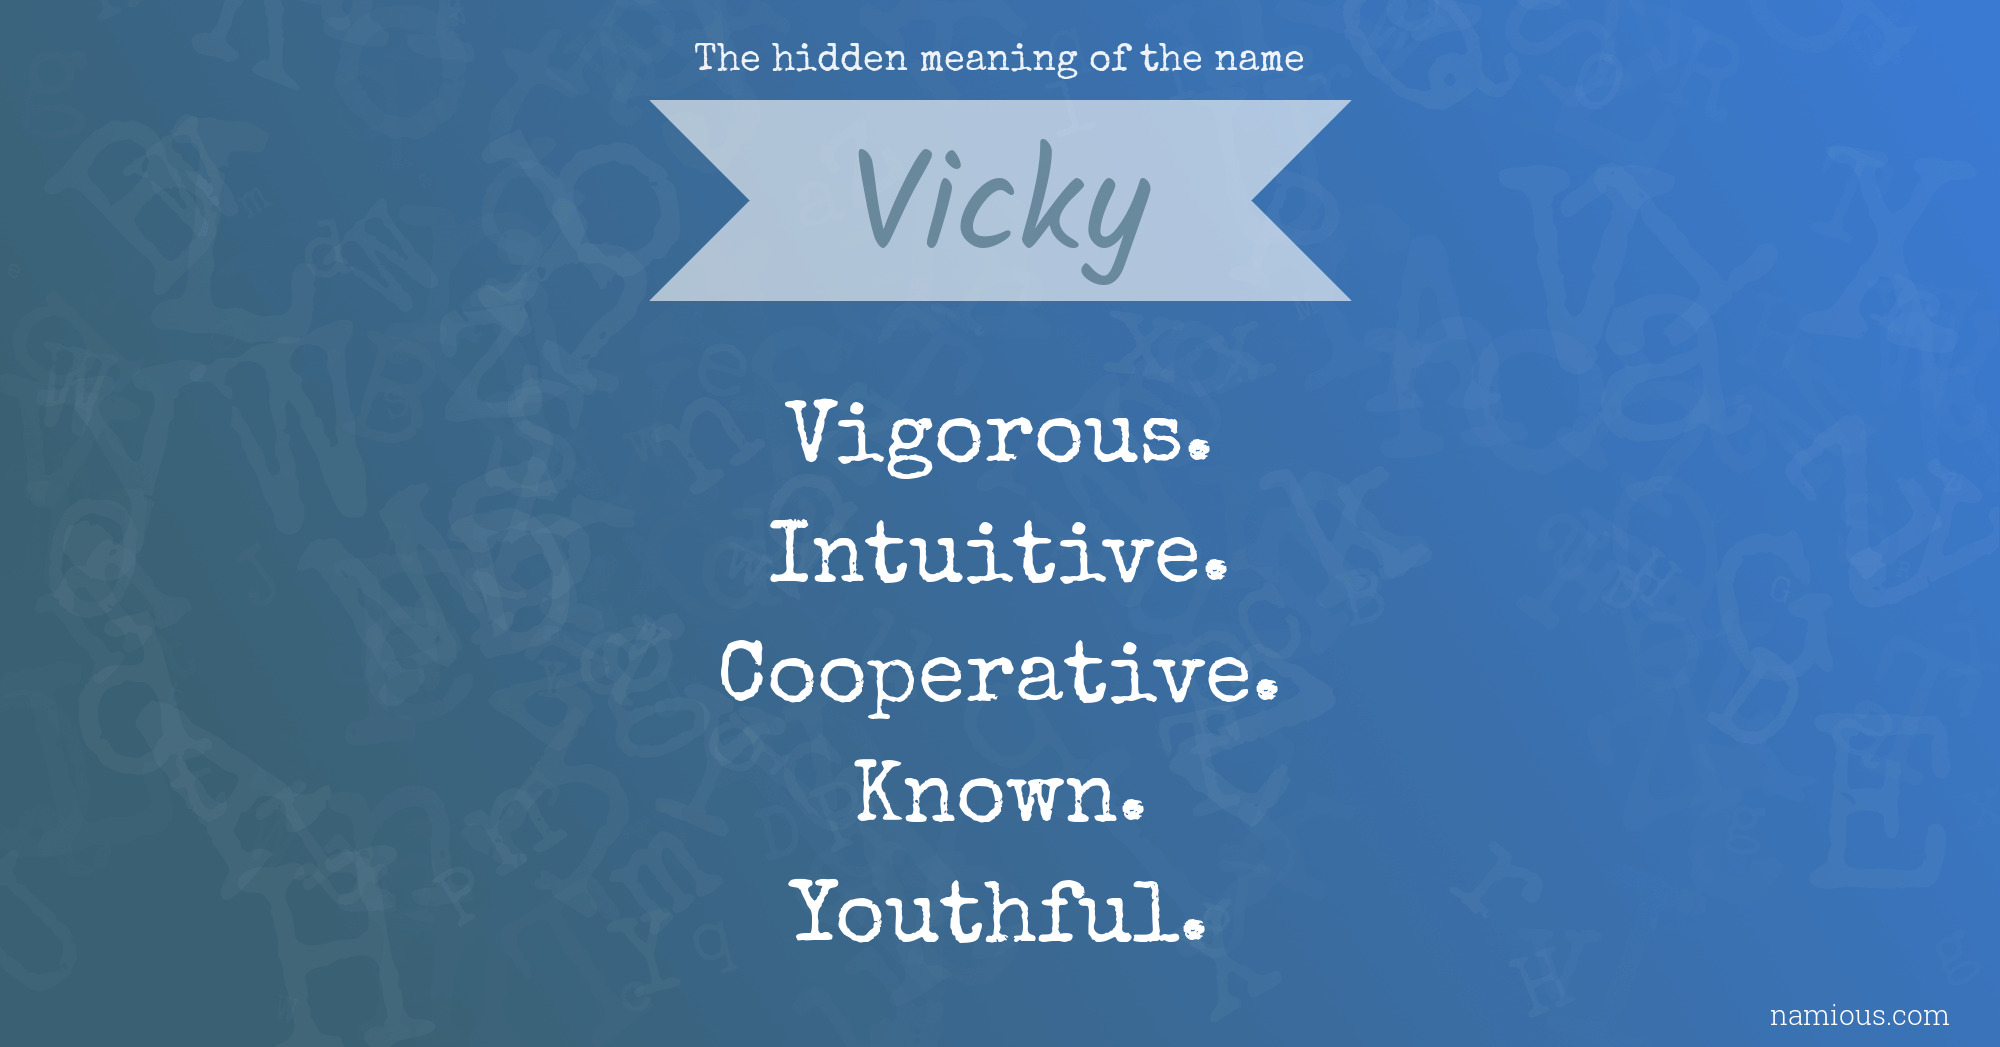 The hidden meaning of the name Vicky